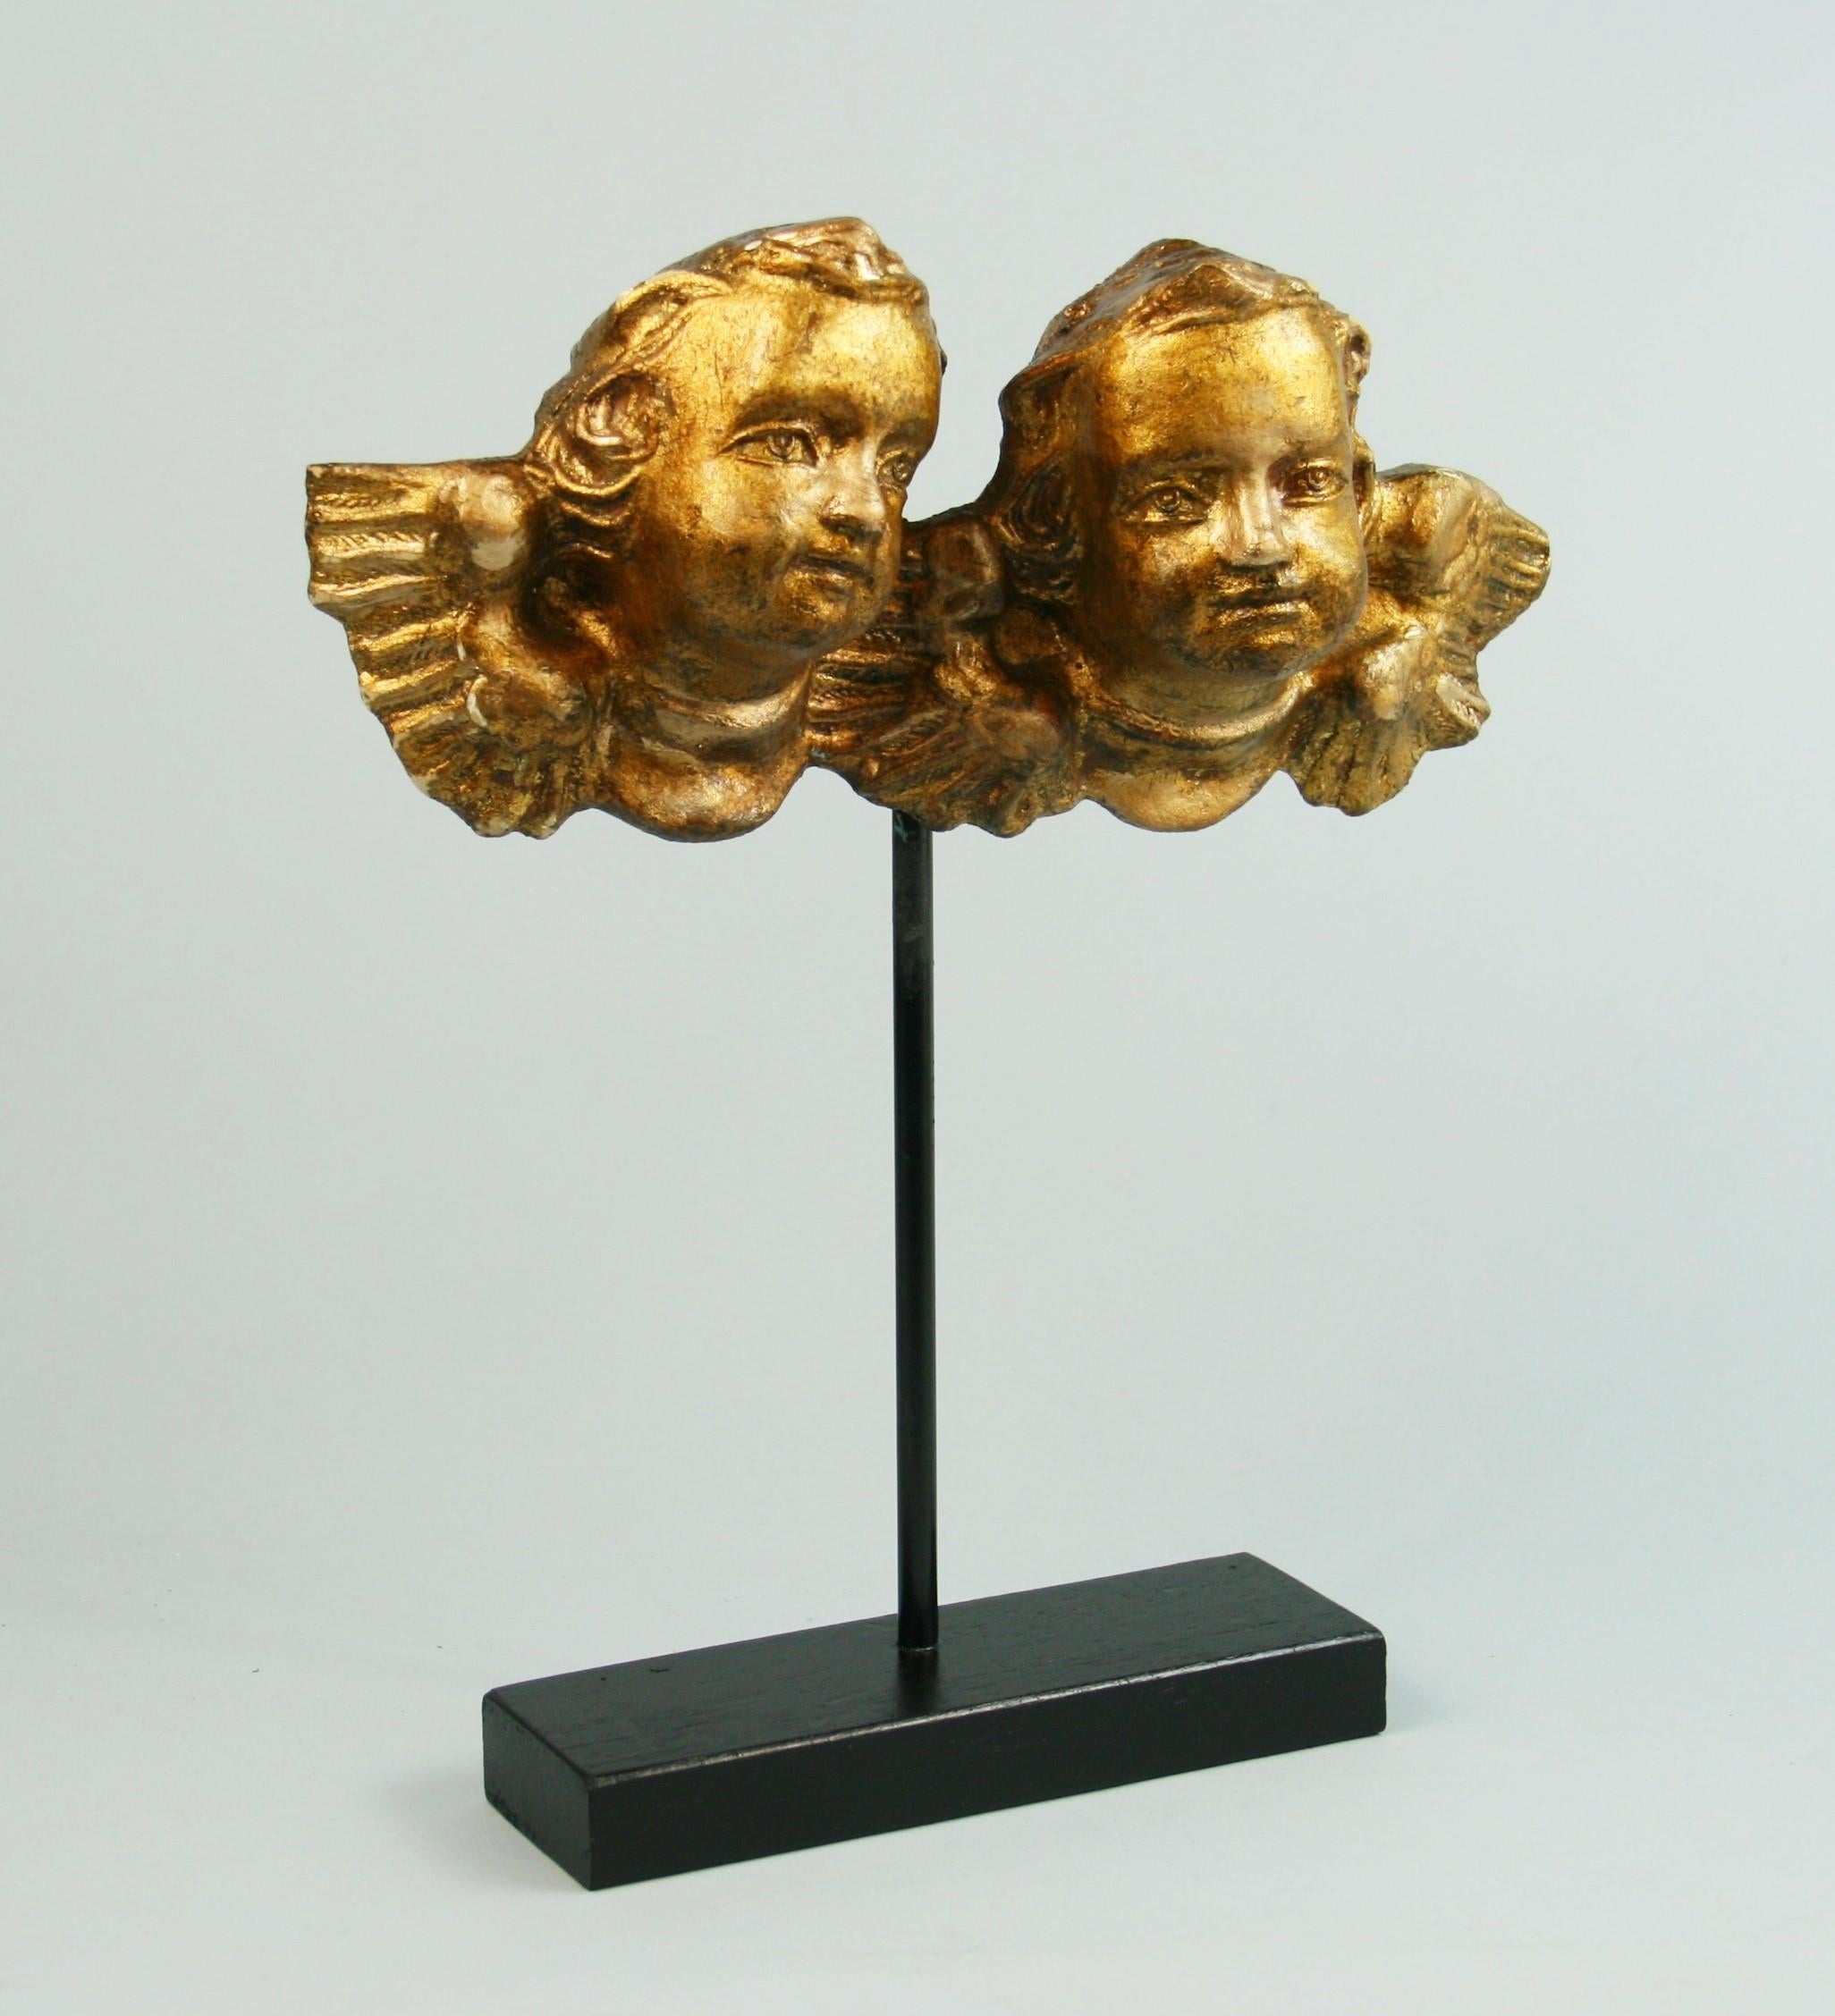 3-549, hand carved Italian putti mounted on stand.